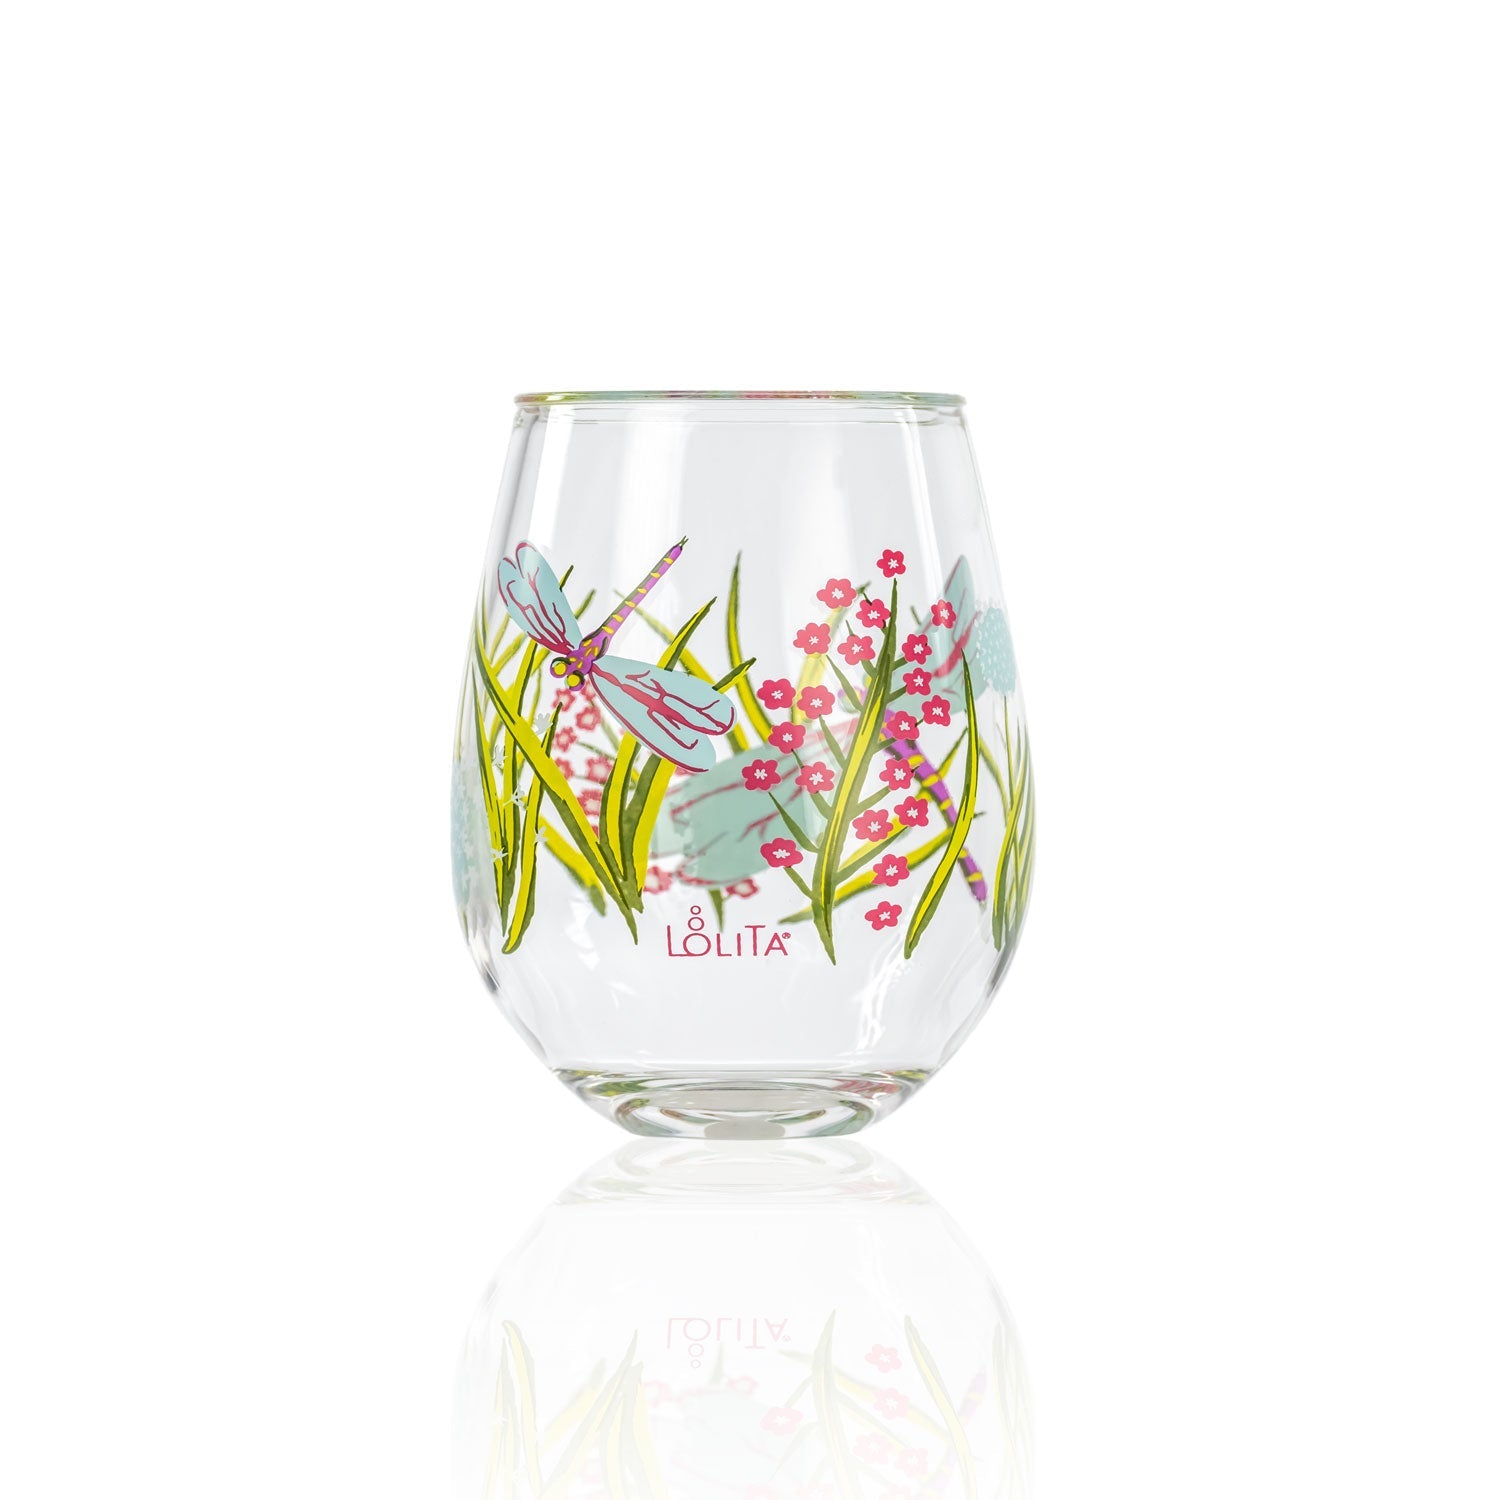 Party To Go by Lolita Dragonfly 15oz Acrylic Stemless Wine Glasses